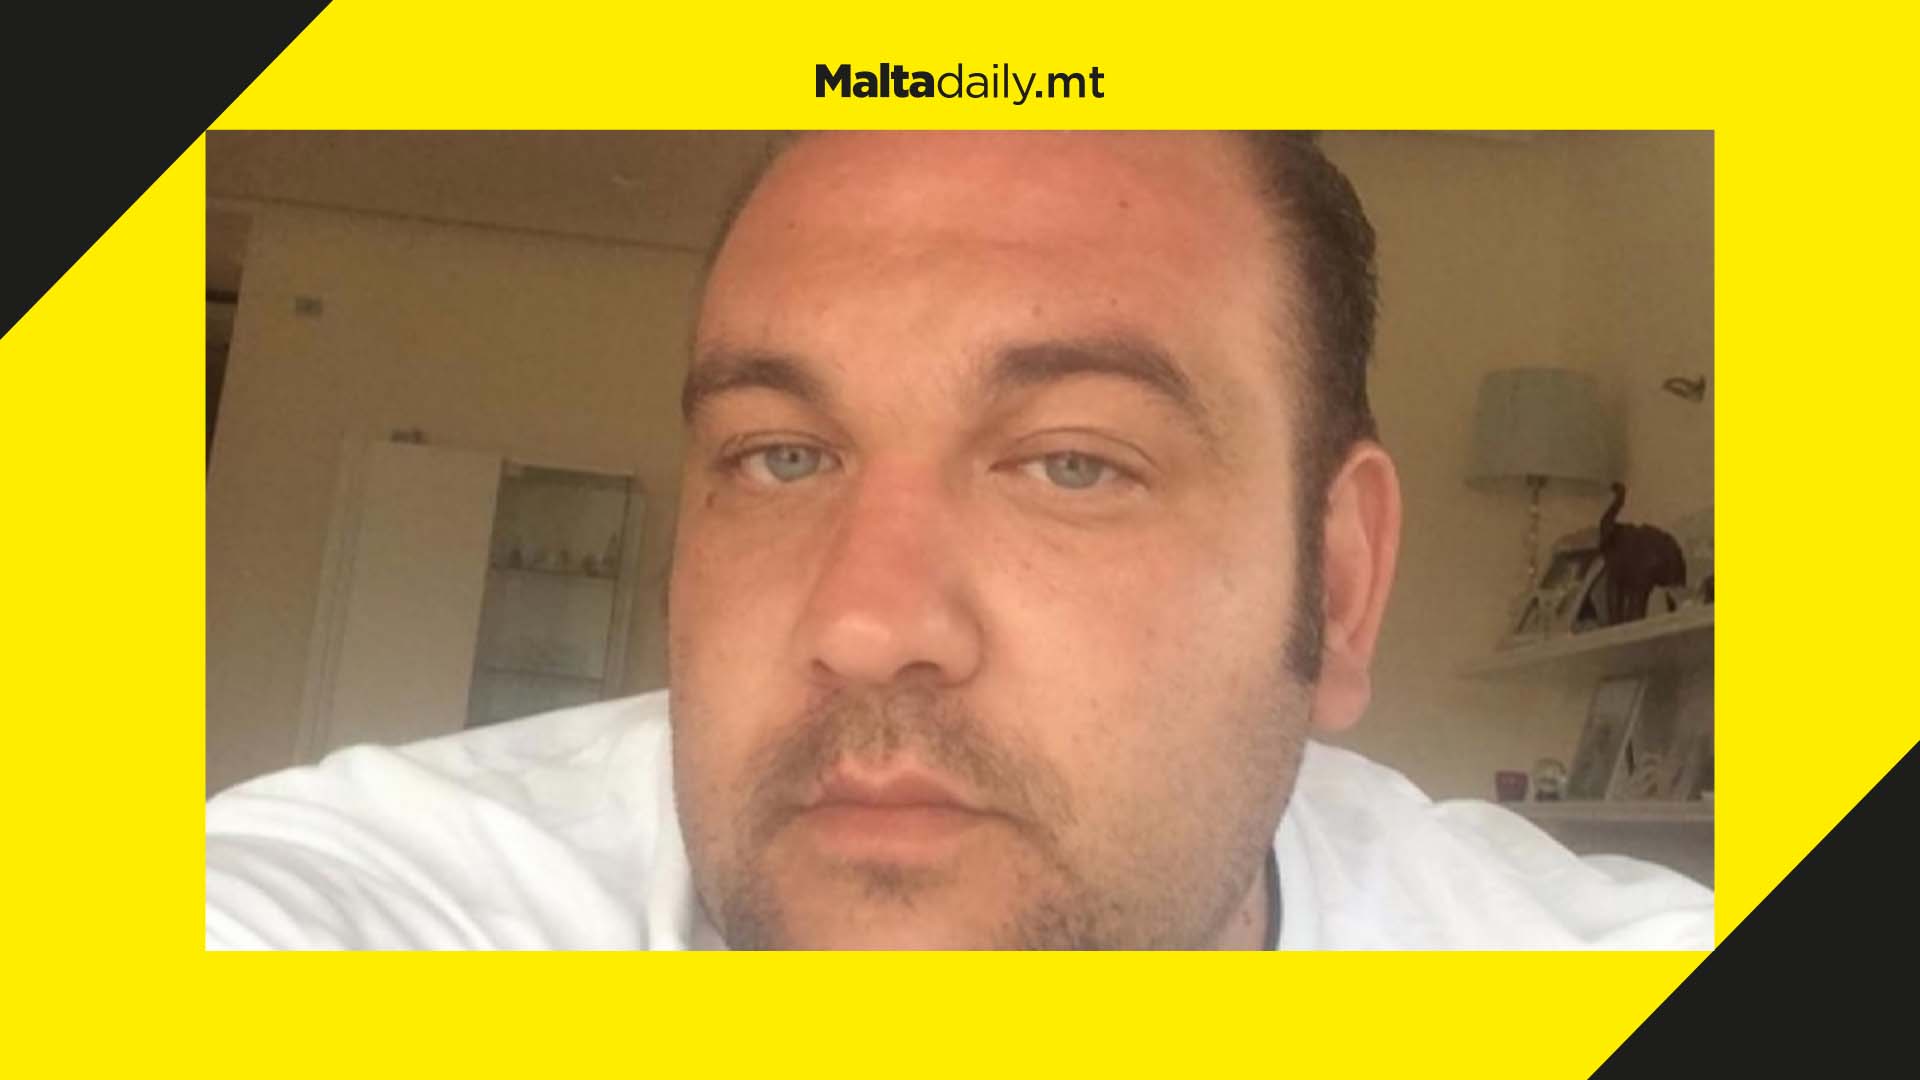 More Supermarkets boss who fled Malta found in Scotland; to be extradited to Malta